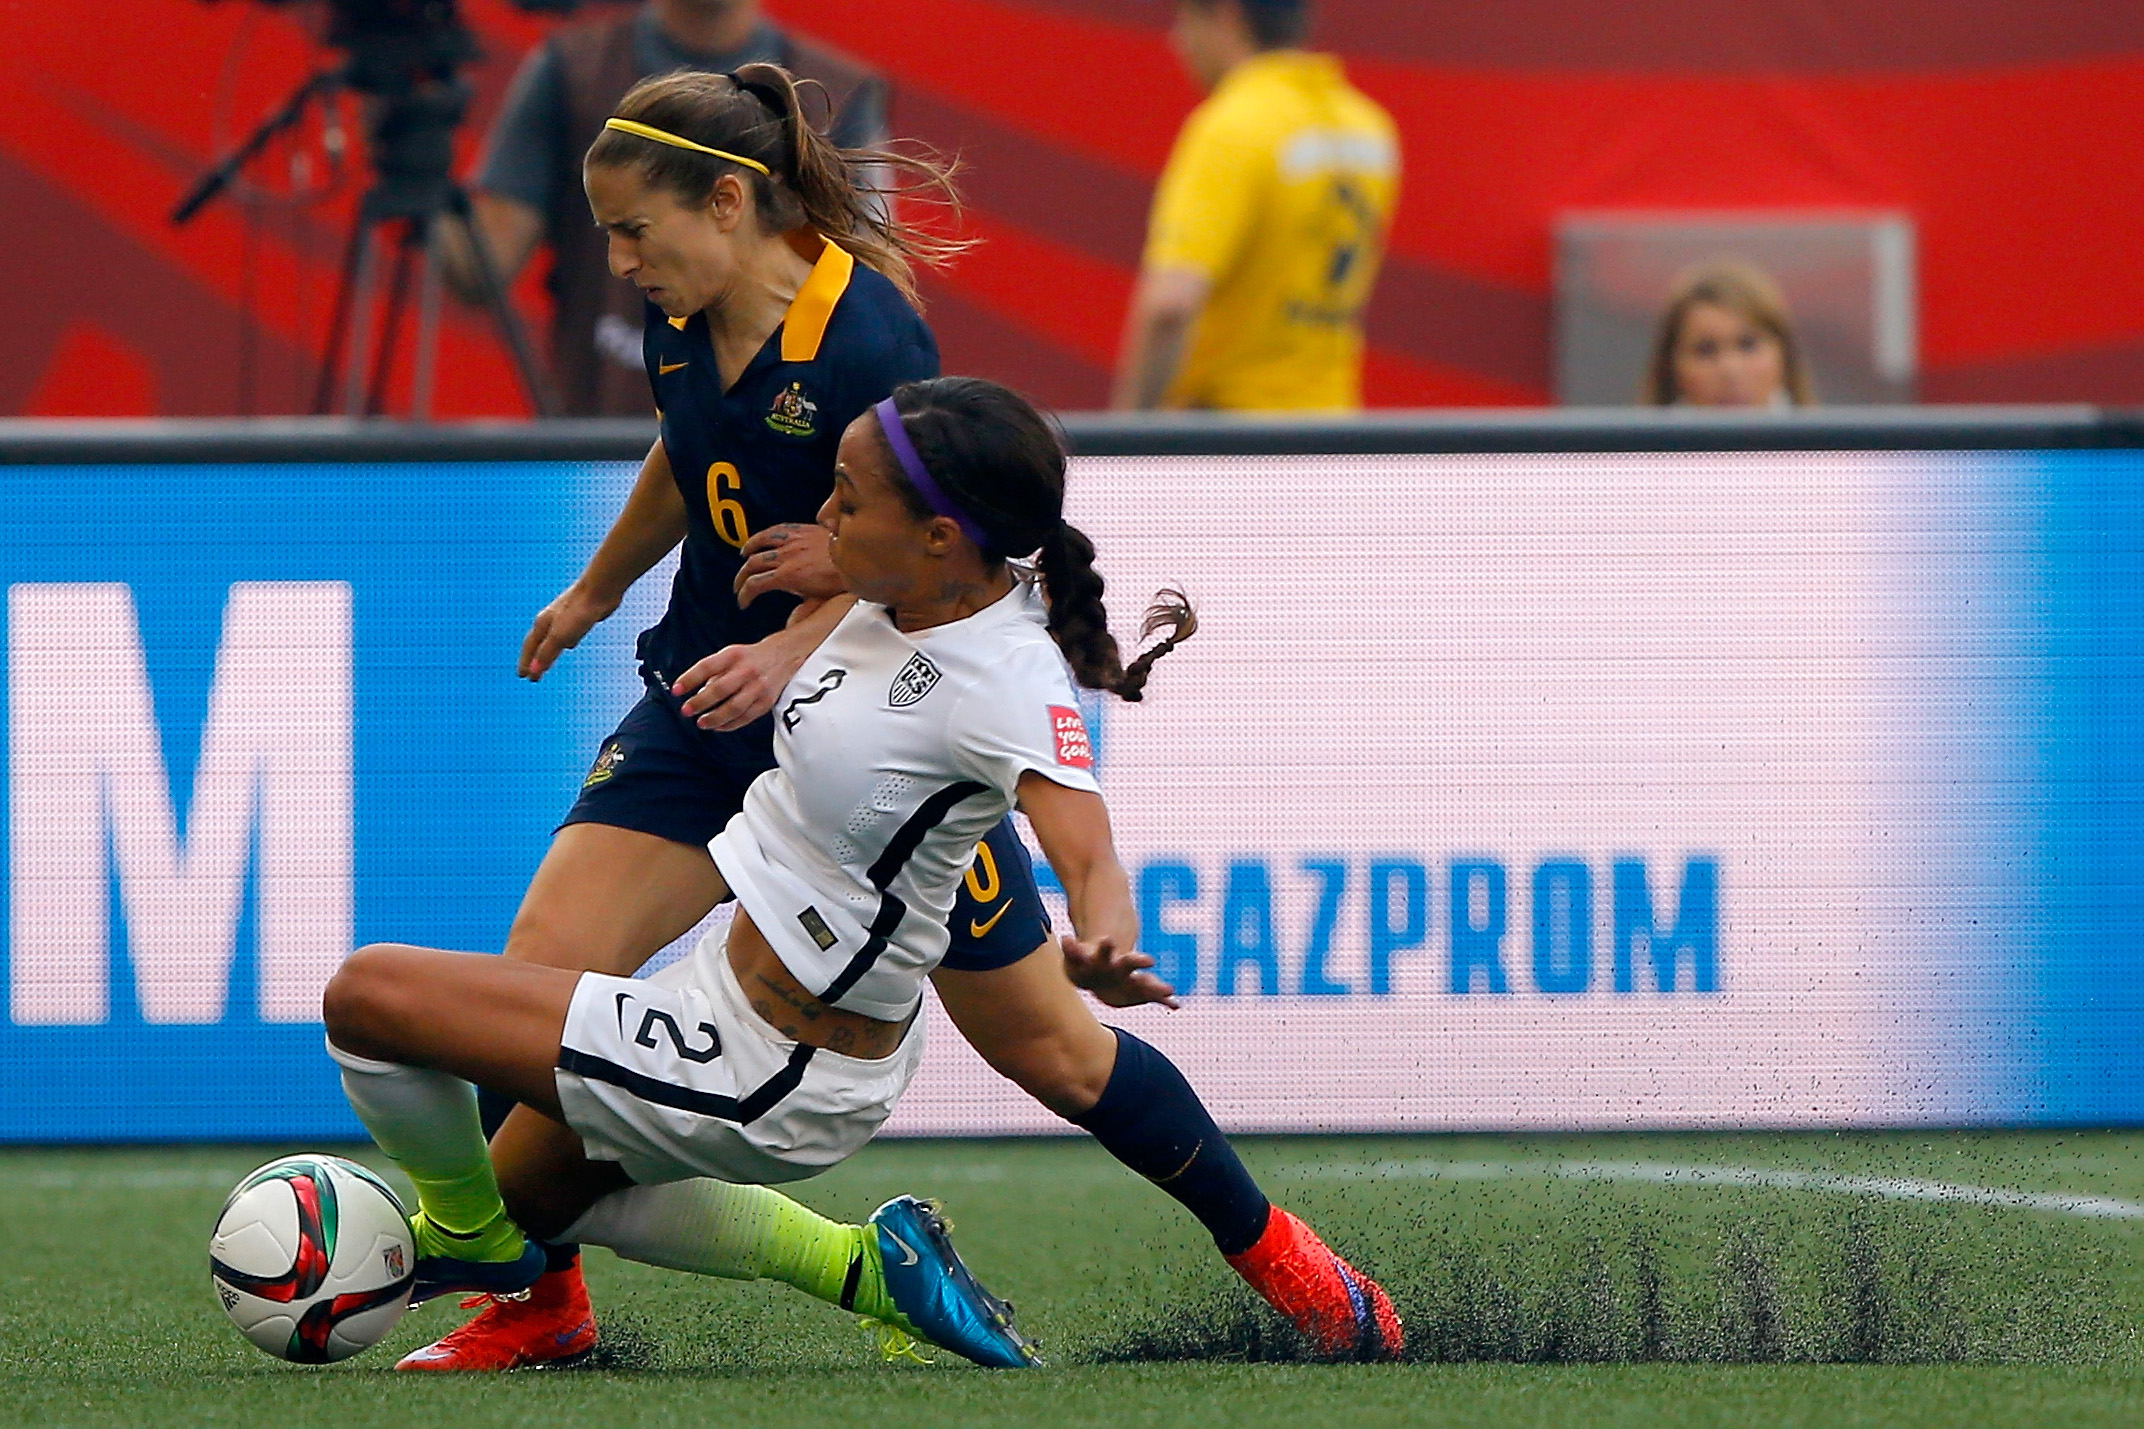 Sydney Leroux of the U.S. challenges Servet Uzunlar of Australia in the first half during the FIFA Women's World Cup 2015 Group D match at Winnipeg Stadium in Winnipeg, Canada, on June 8, 2015 (Kevin C. Cox—Getty Images)